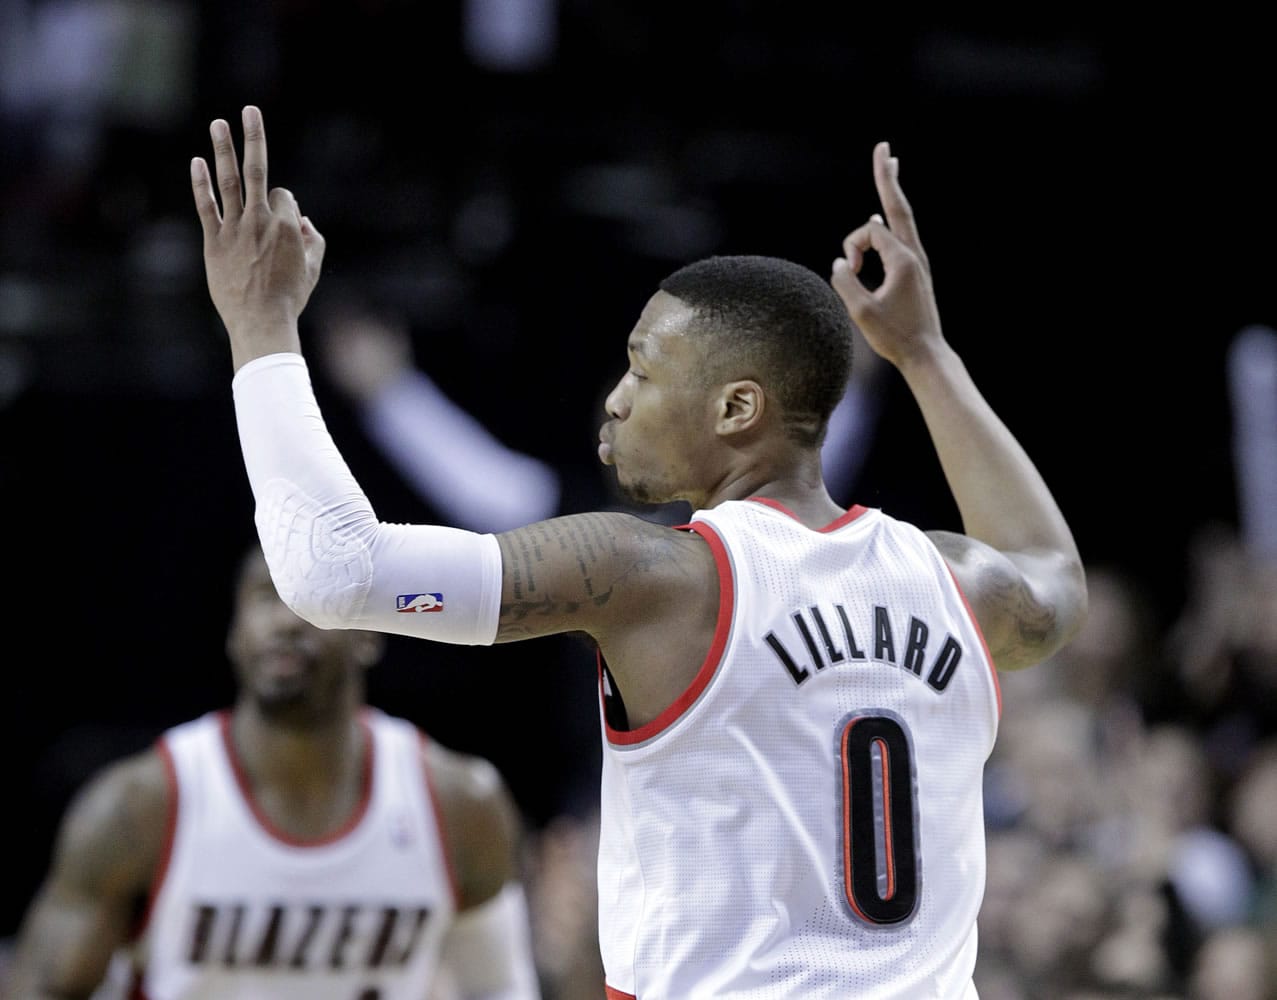 Portland Trail Blazers guard Damian Lillard signals after sinking a three  point shot during the second half of an NBA basketball game against the Utah Jazz in Portland, Ore., Friday, Feb. 21, 2014.  Lillard led Portland in scoring with 28 points as they won 102-94.